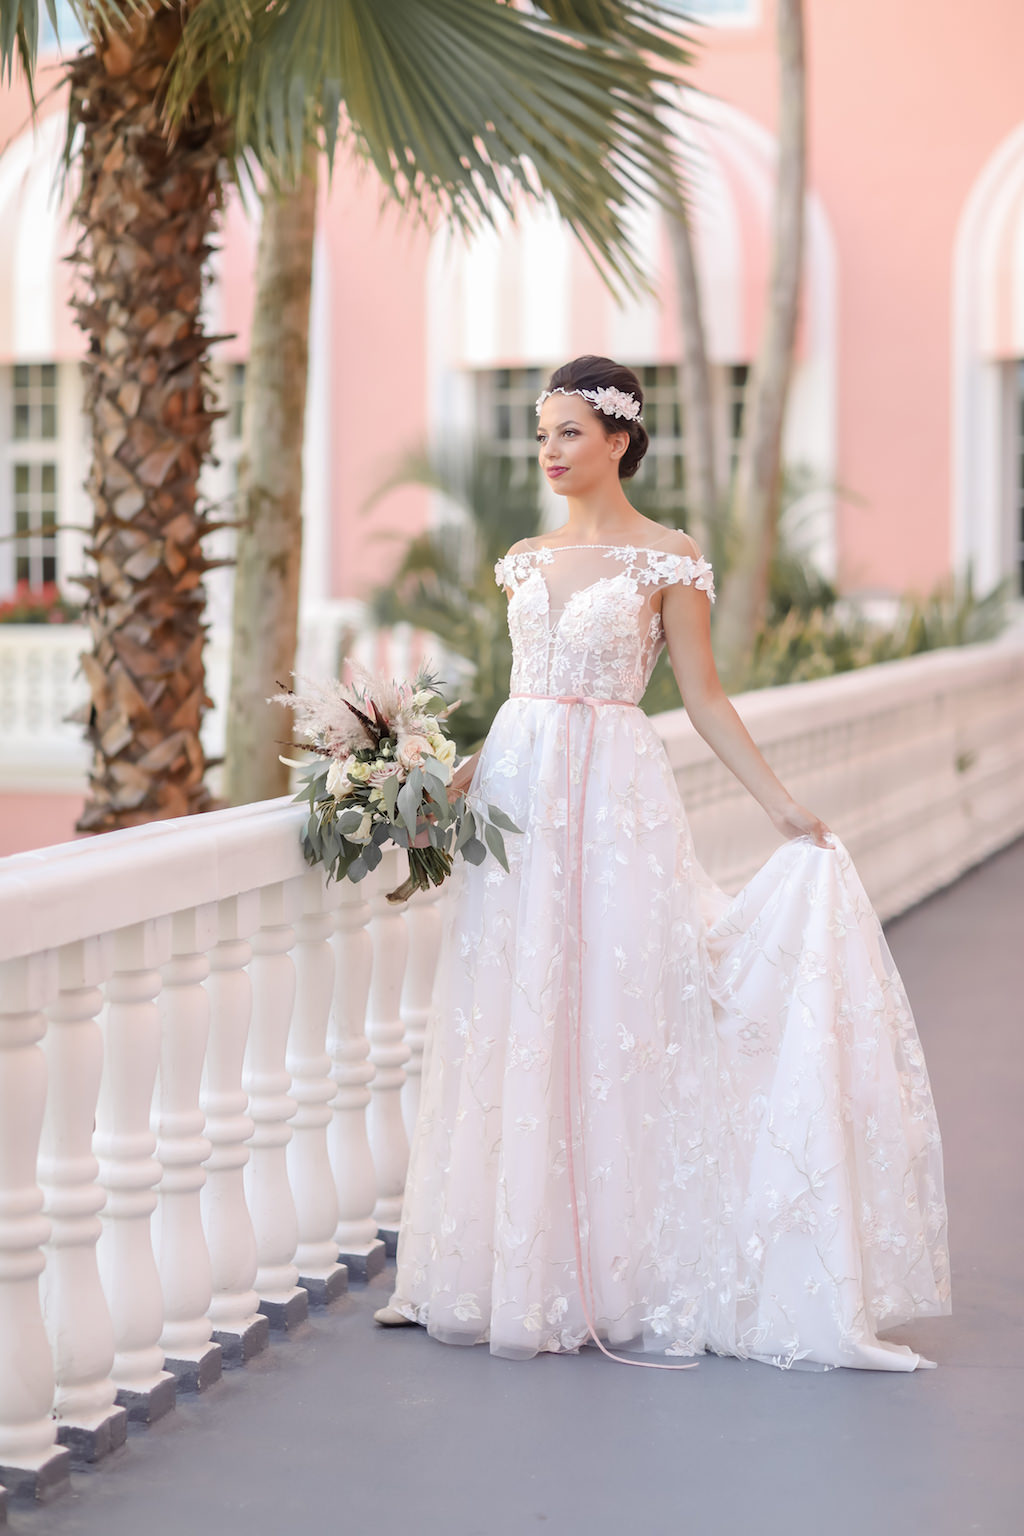 Bride Portrait in Illusion and Floral Applique Empire Waist High Neck Wedding Dress with Blush Pink Ribbon and Ivory and Greenery Floral Bouquet | St. Petersburg Photographer Lifelong Photography Studios | Tampa Bay Wedding Dress Shop Truly Forever Bridal | St. Petersburg Historic Hotel The Don Cesar | Instagram